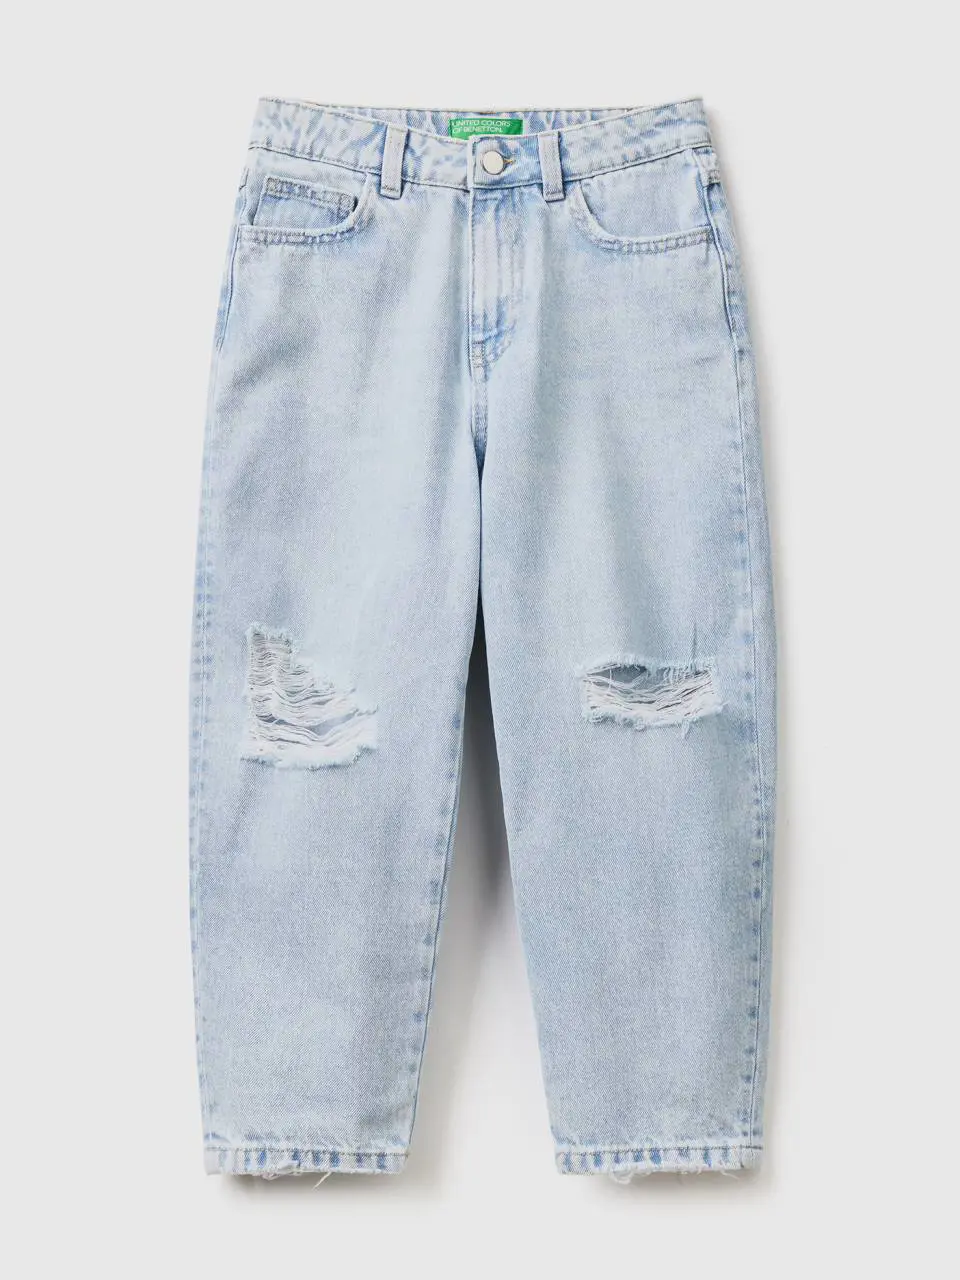 Benetton baggy fit jeans with rips. 1